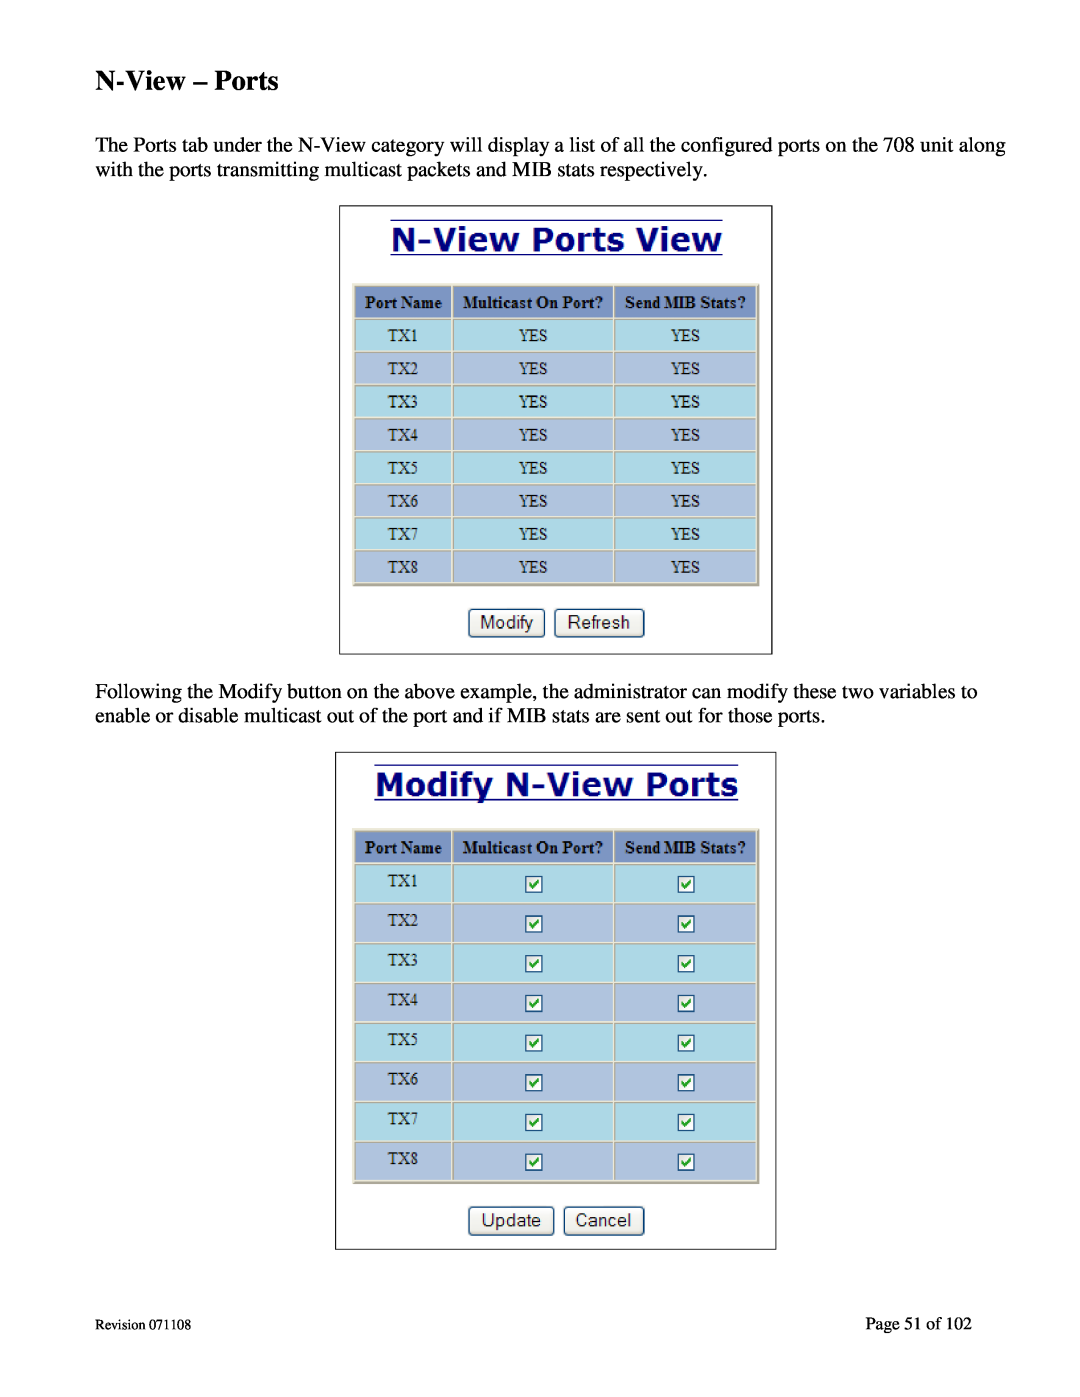 N-Tron 708M12 user manual N-View - Ports, Page 51 of 